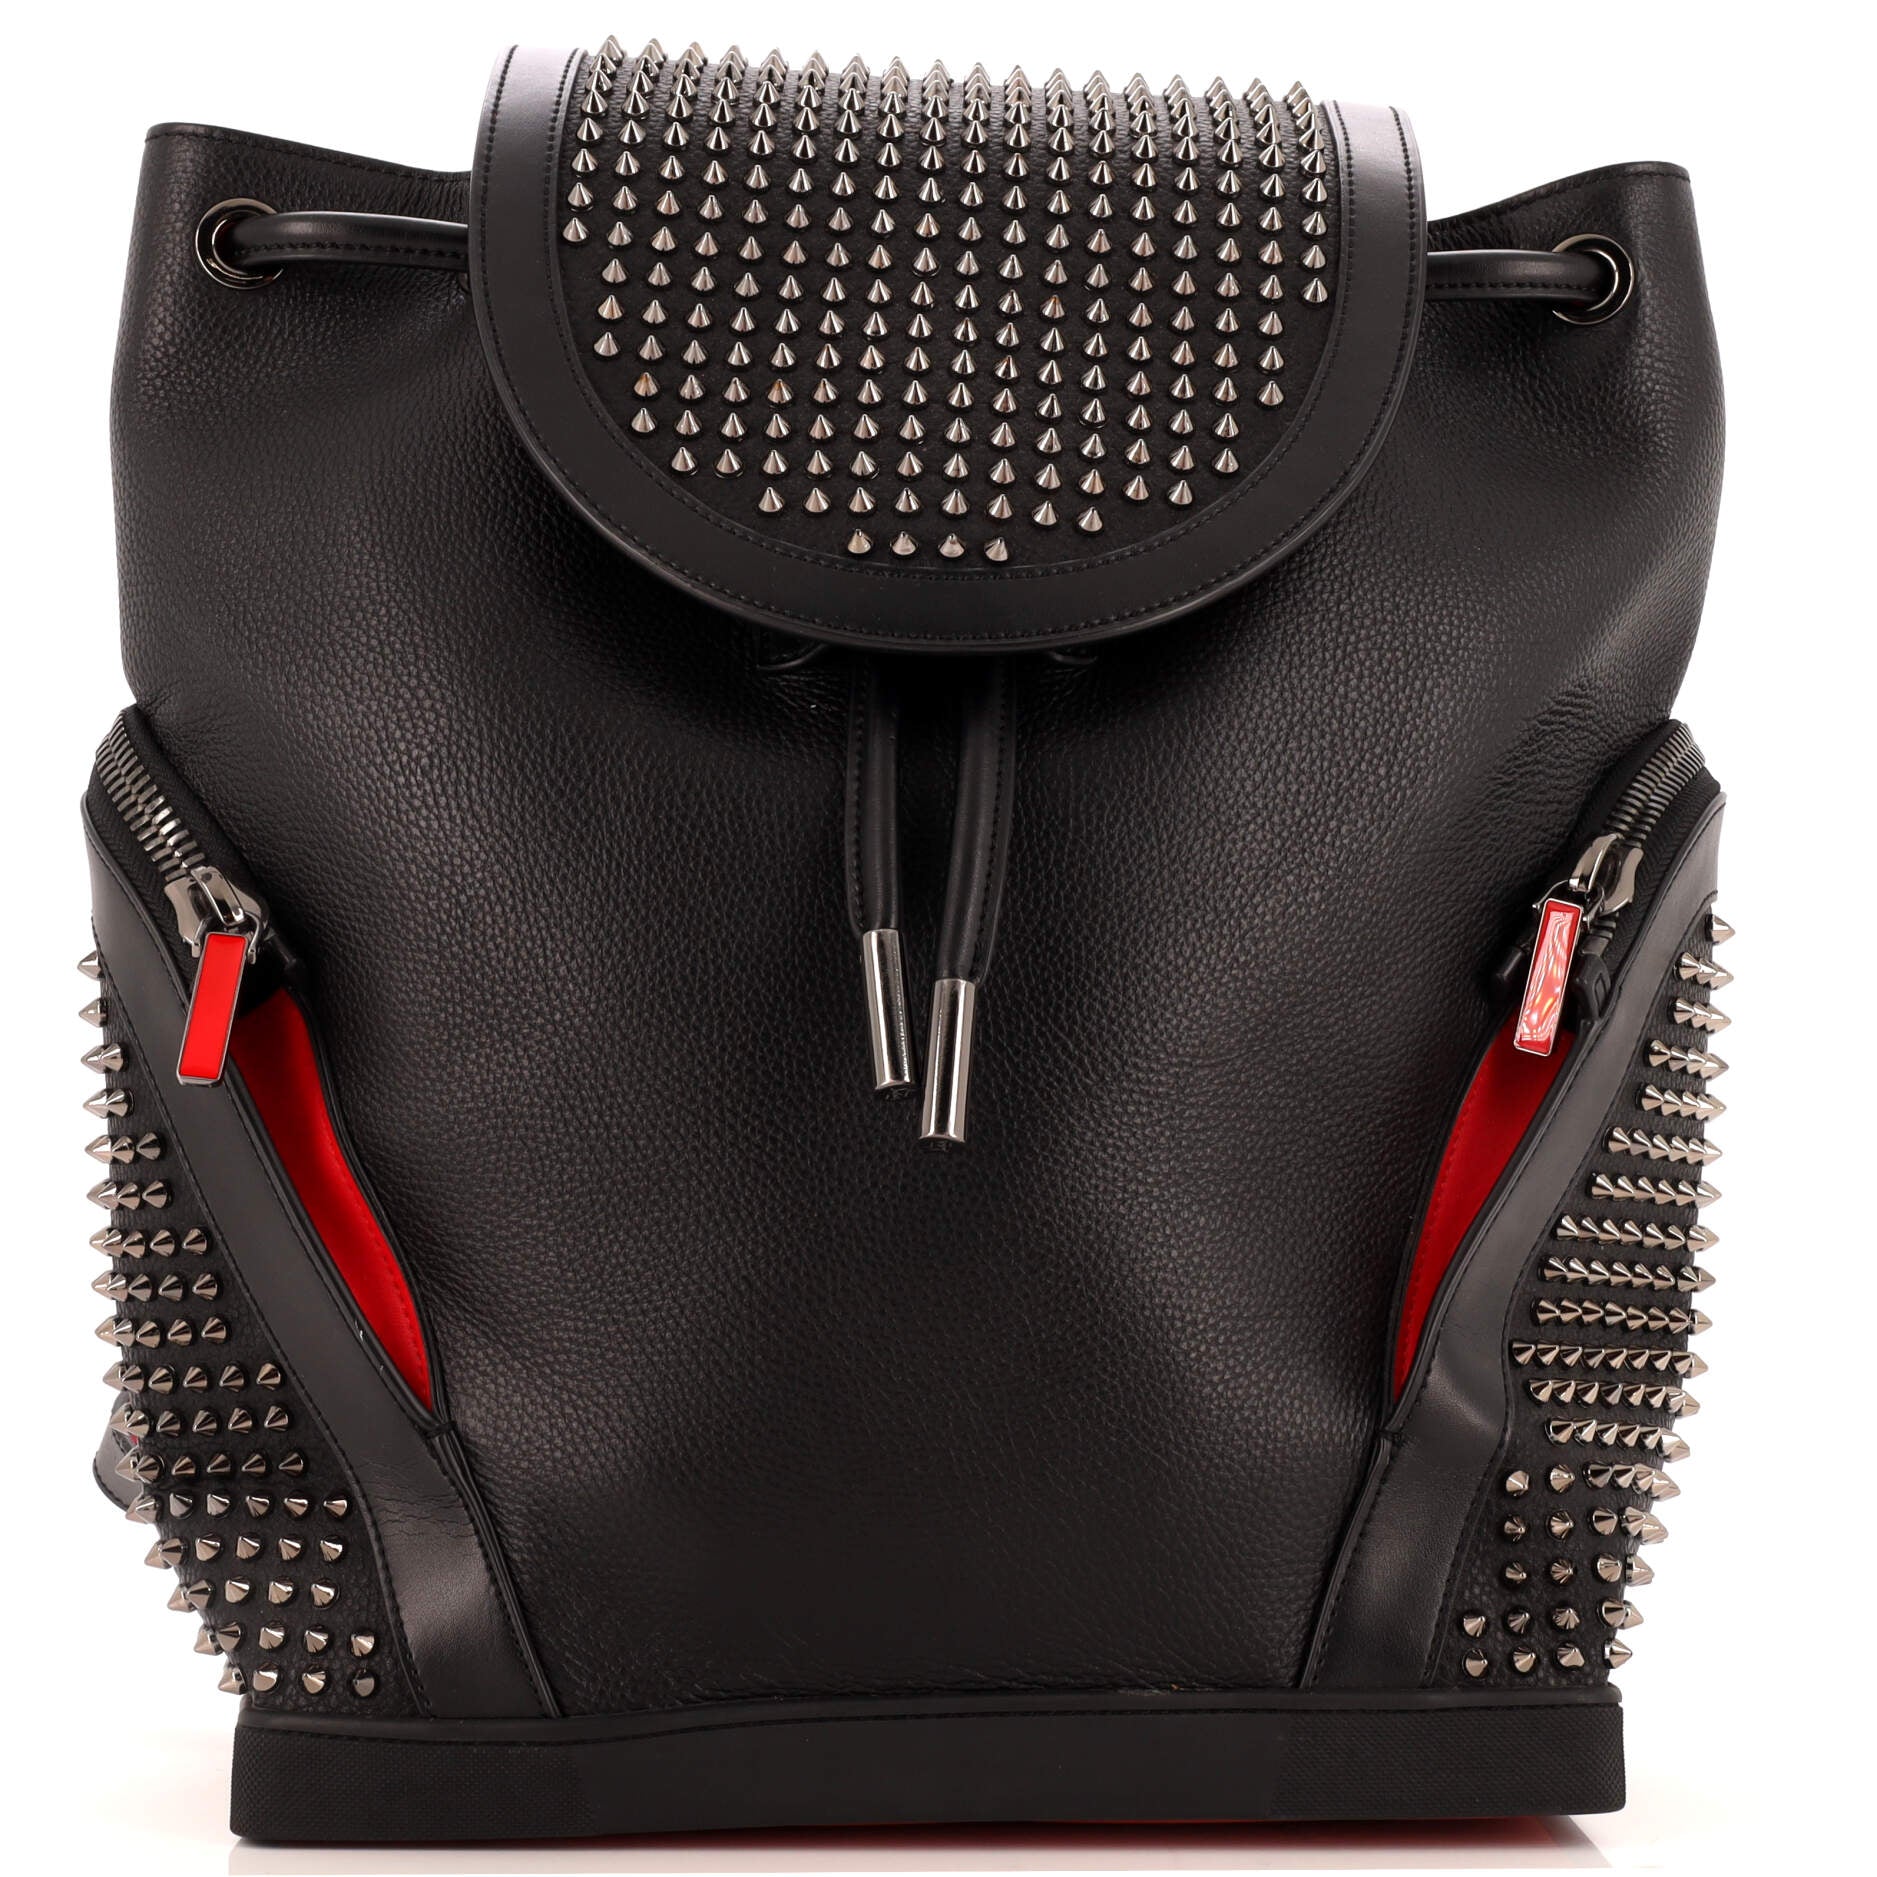 Explorafunk Backpack Spiked Leather